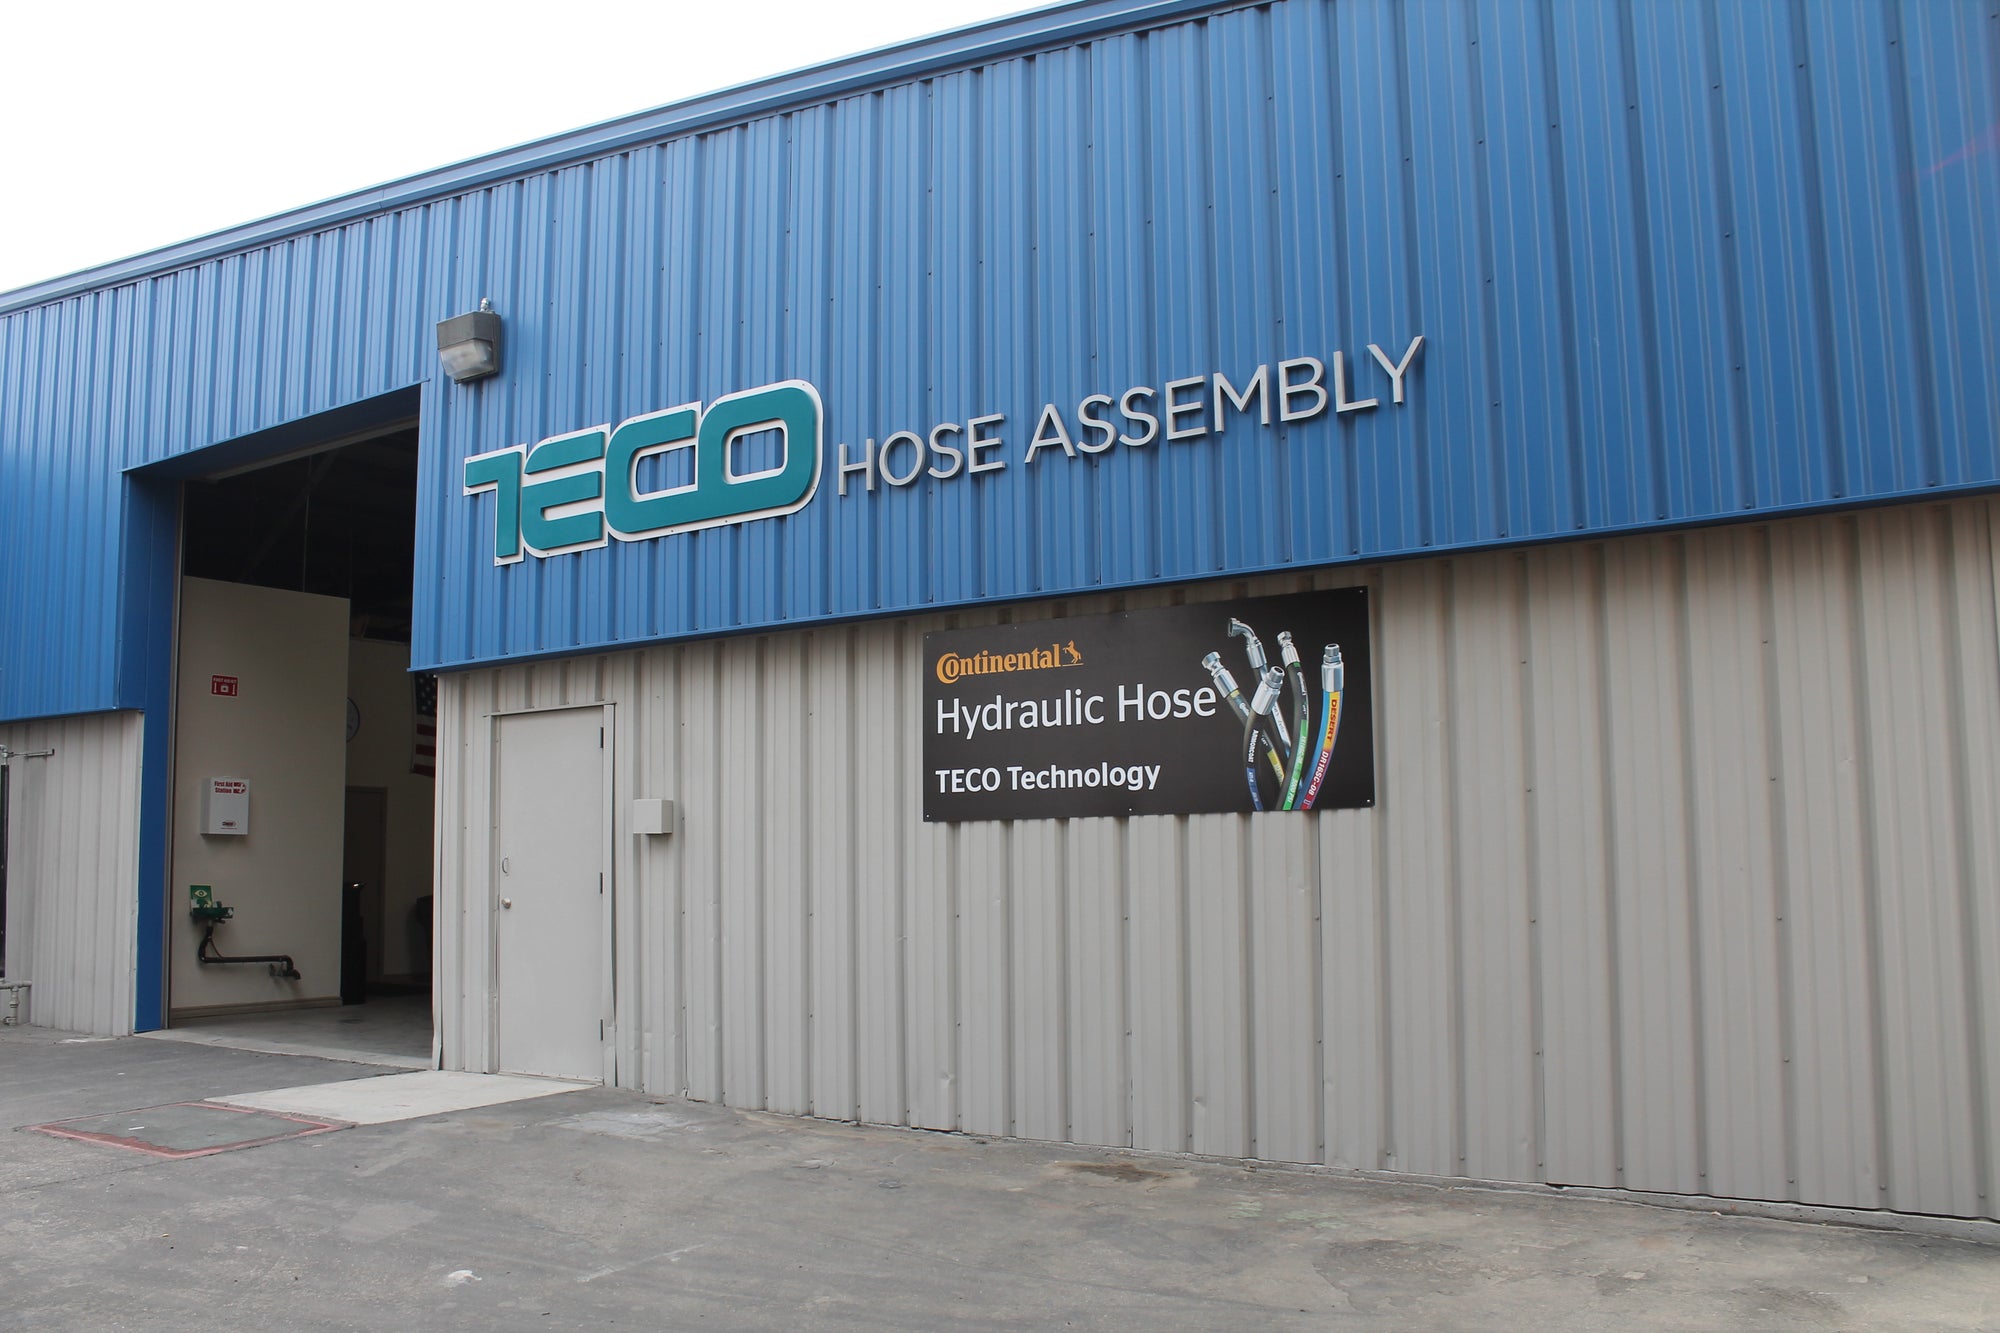 Fresno,CA is home to our NEW Hose Fab. Facility